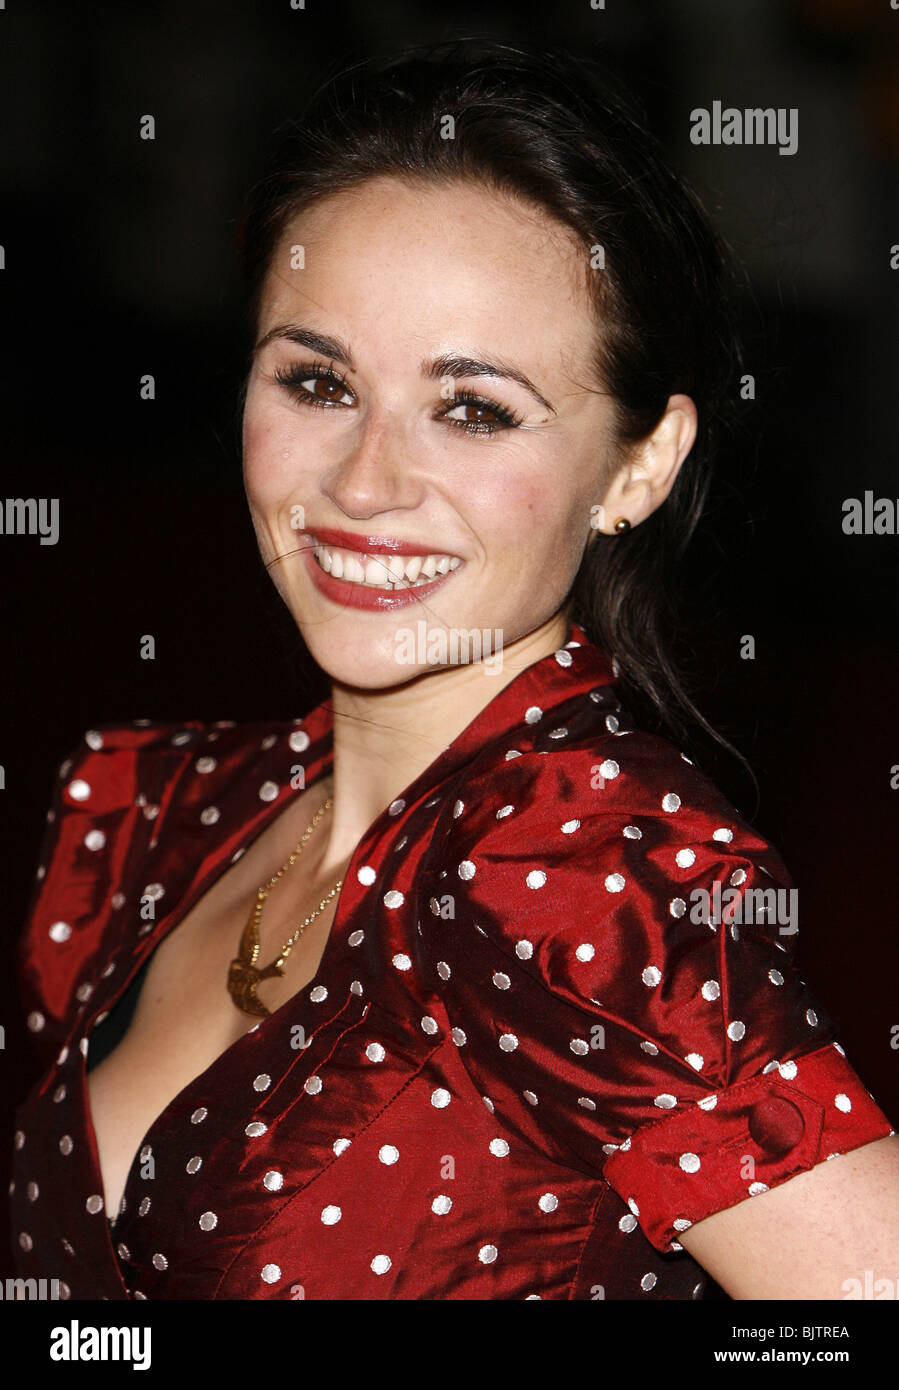 EMMA PIERSON LIVES OF THE SAINTS PREMIERE THE ODEON LONDON 20 October 2006 Stock Photo